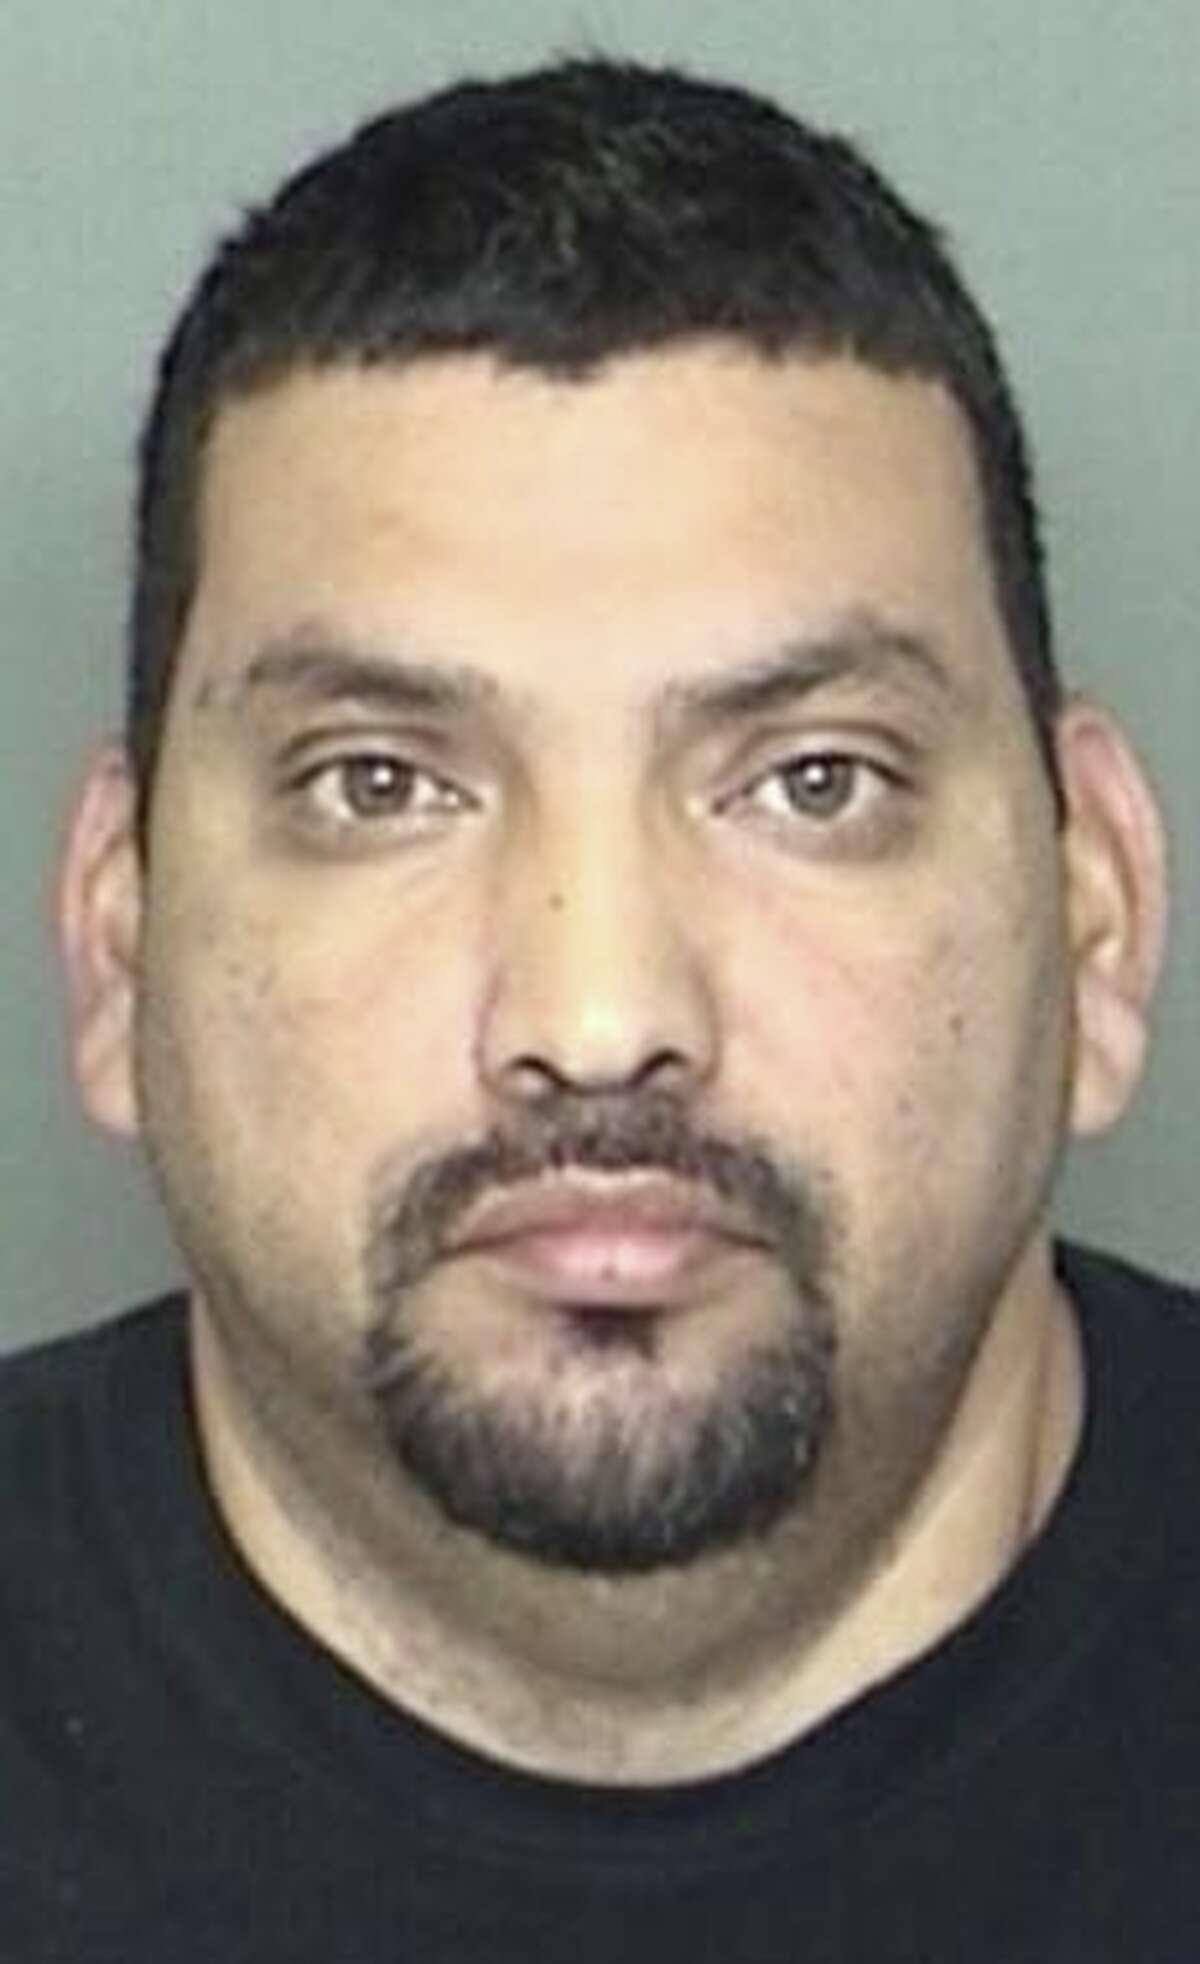 Daniel Flores, 39, of Cotulla, was sentenced to 50 years in prison for aggravated sexual assault of a family member who was under the age of 14 in July 2016.